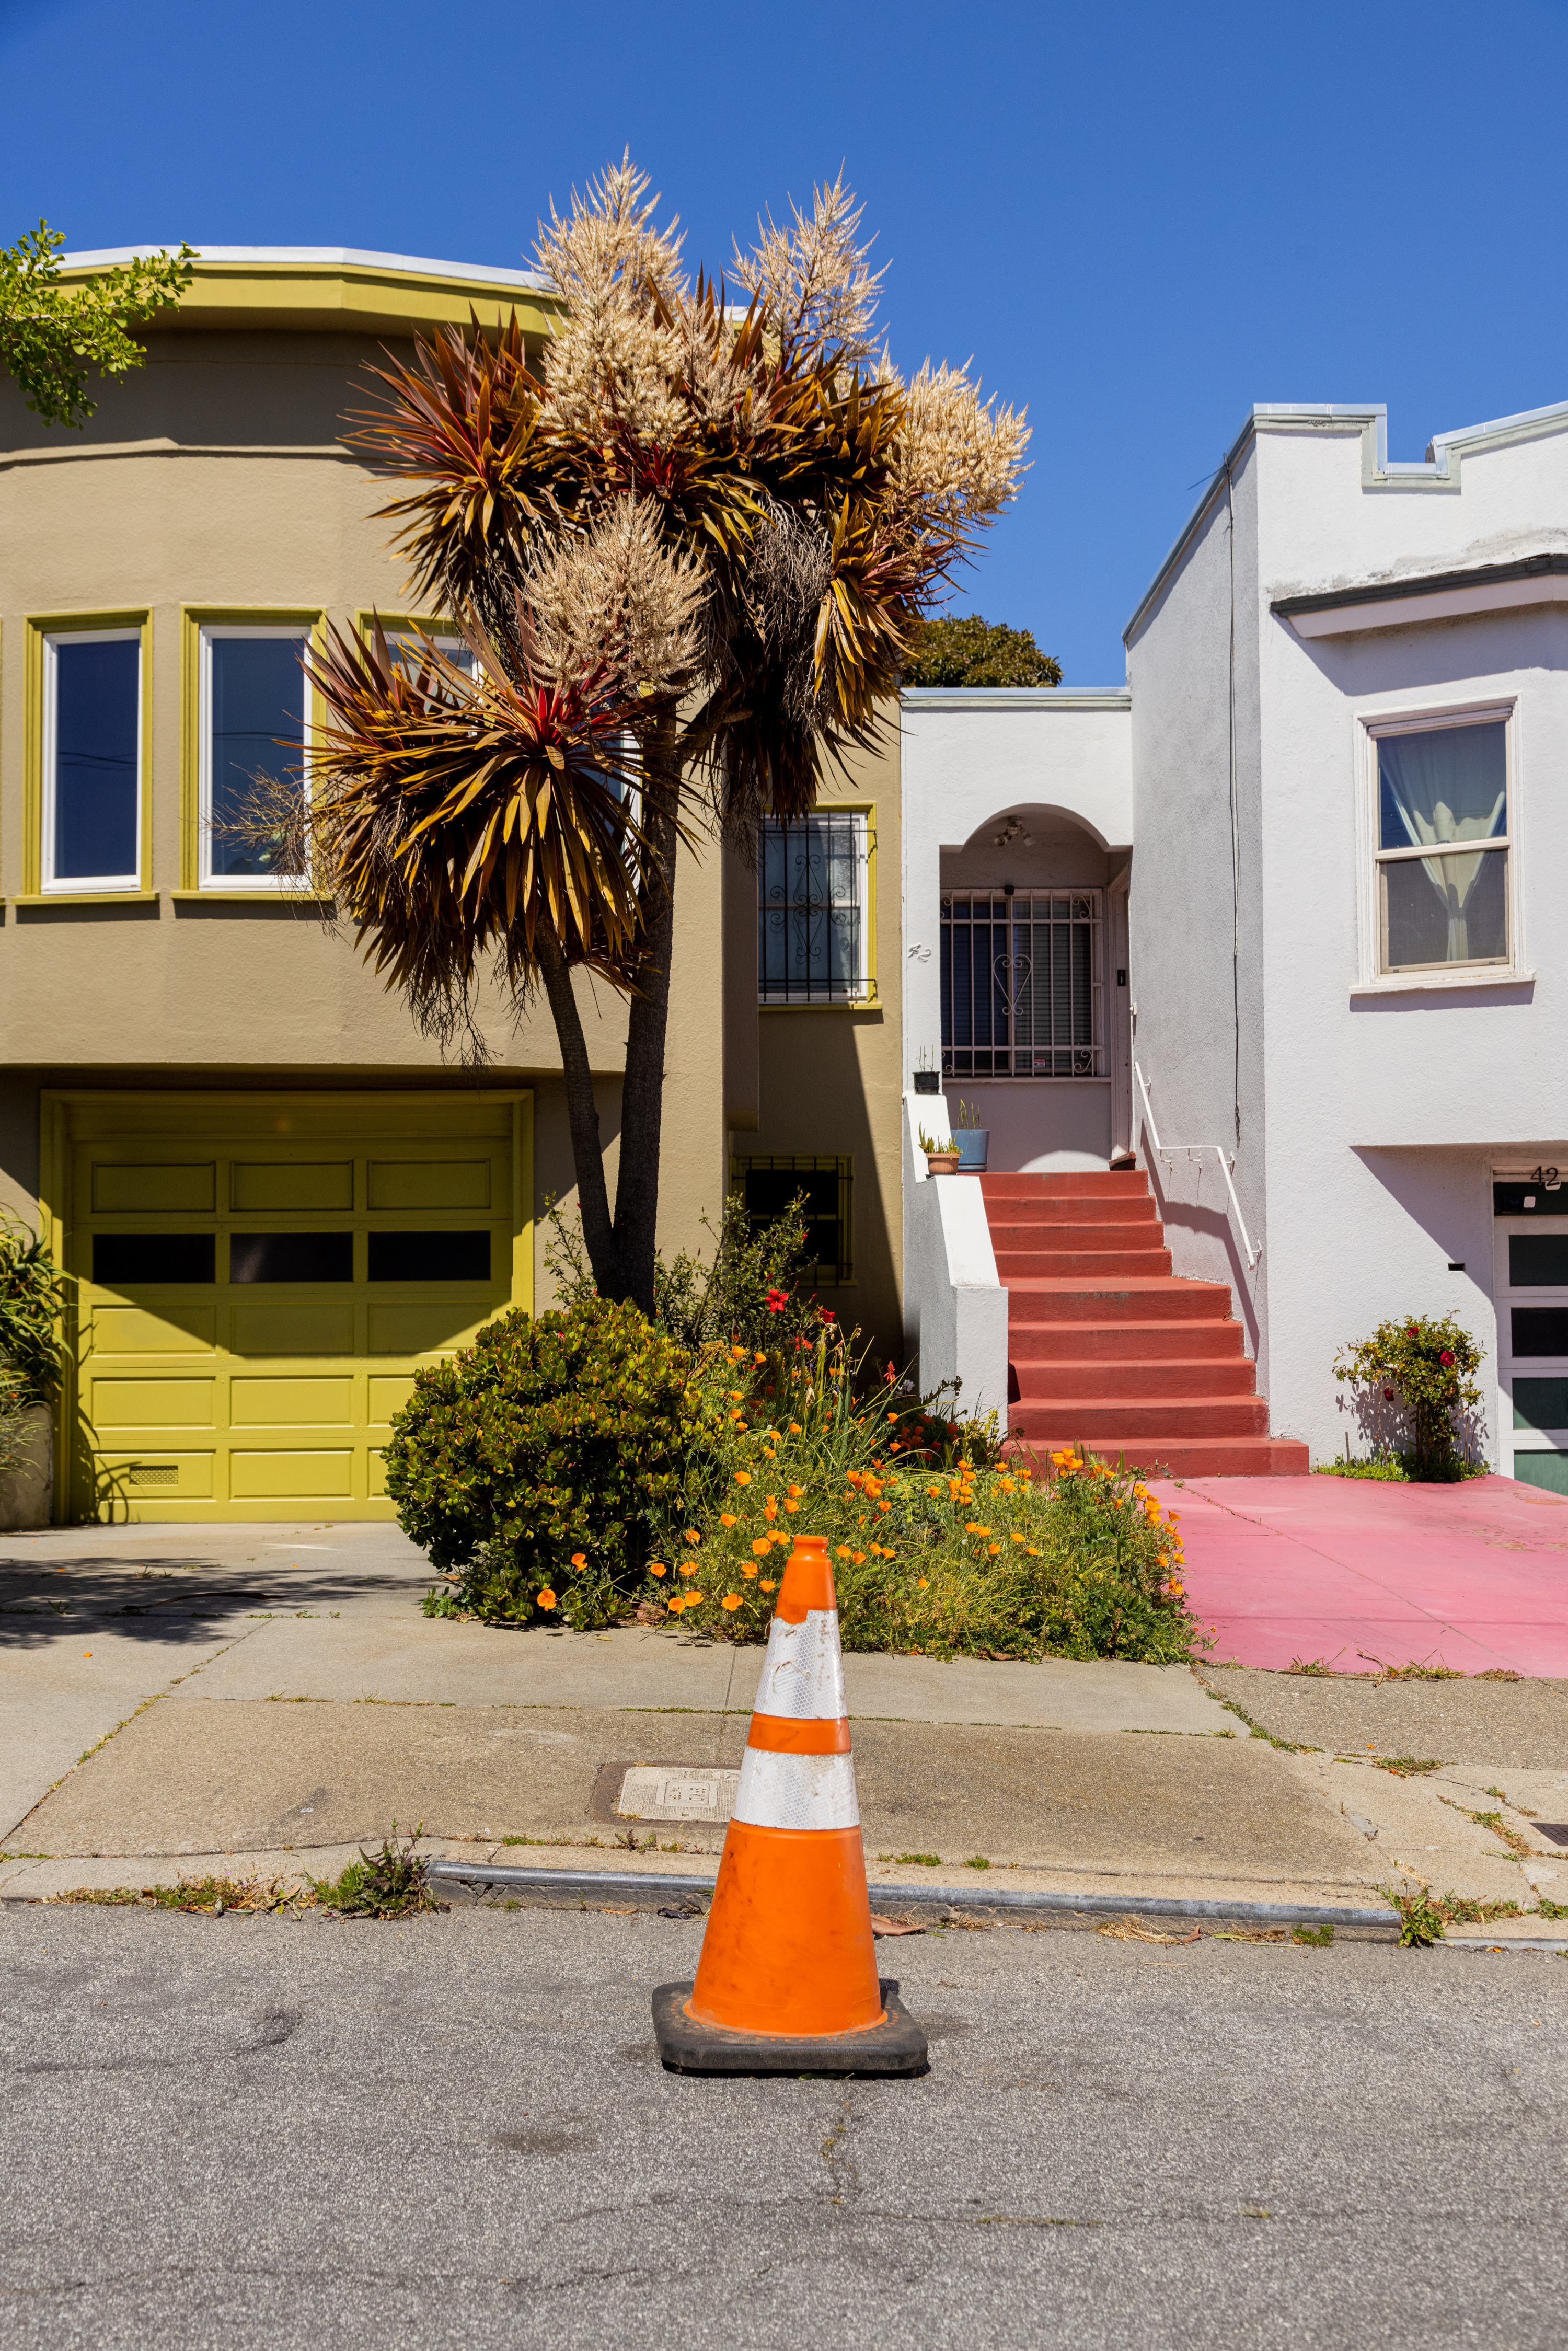 Two houses with distinct colors flank a traffic cone; flowers and a palm tree adorn the sunny scene.